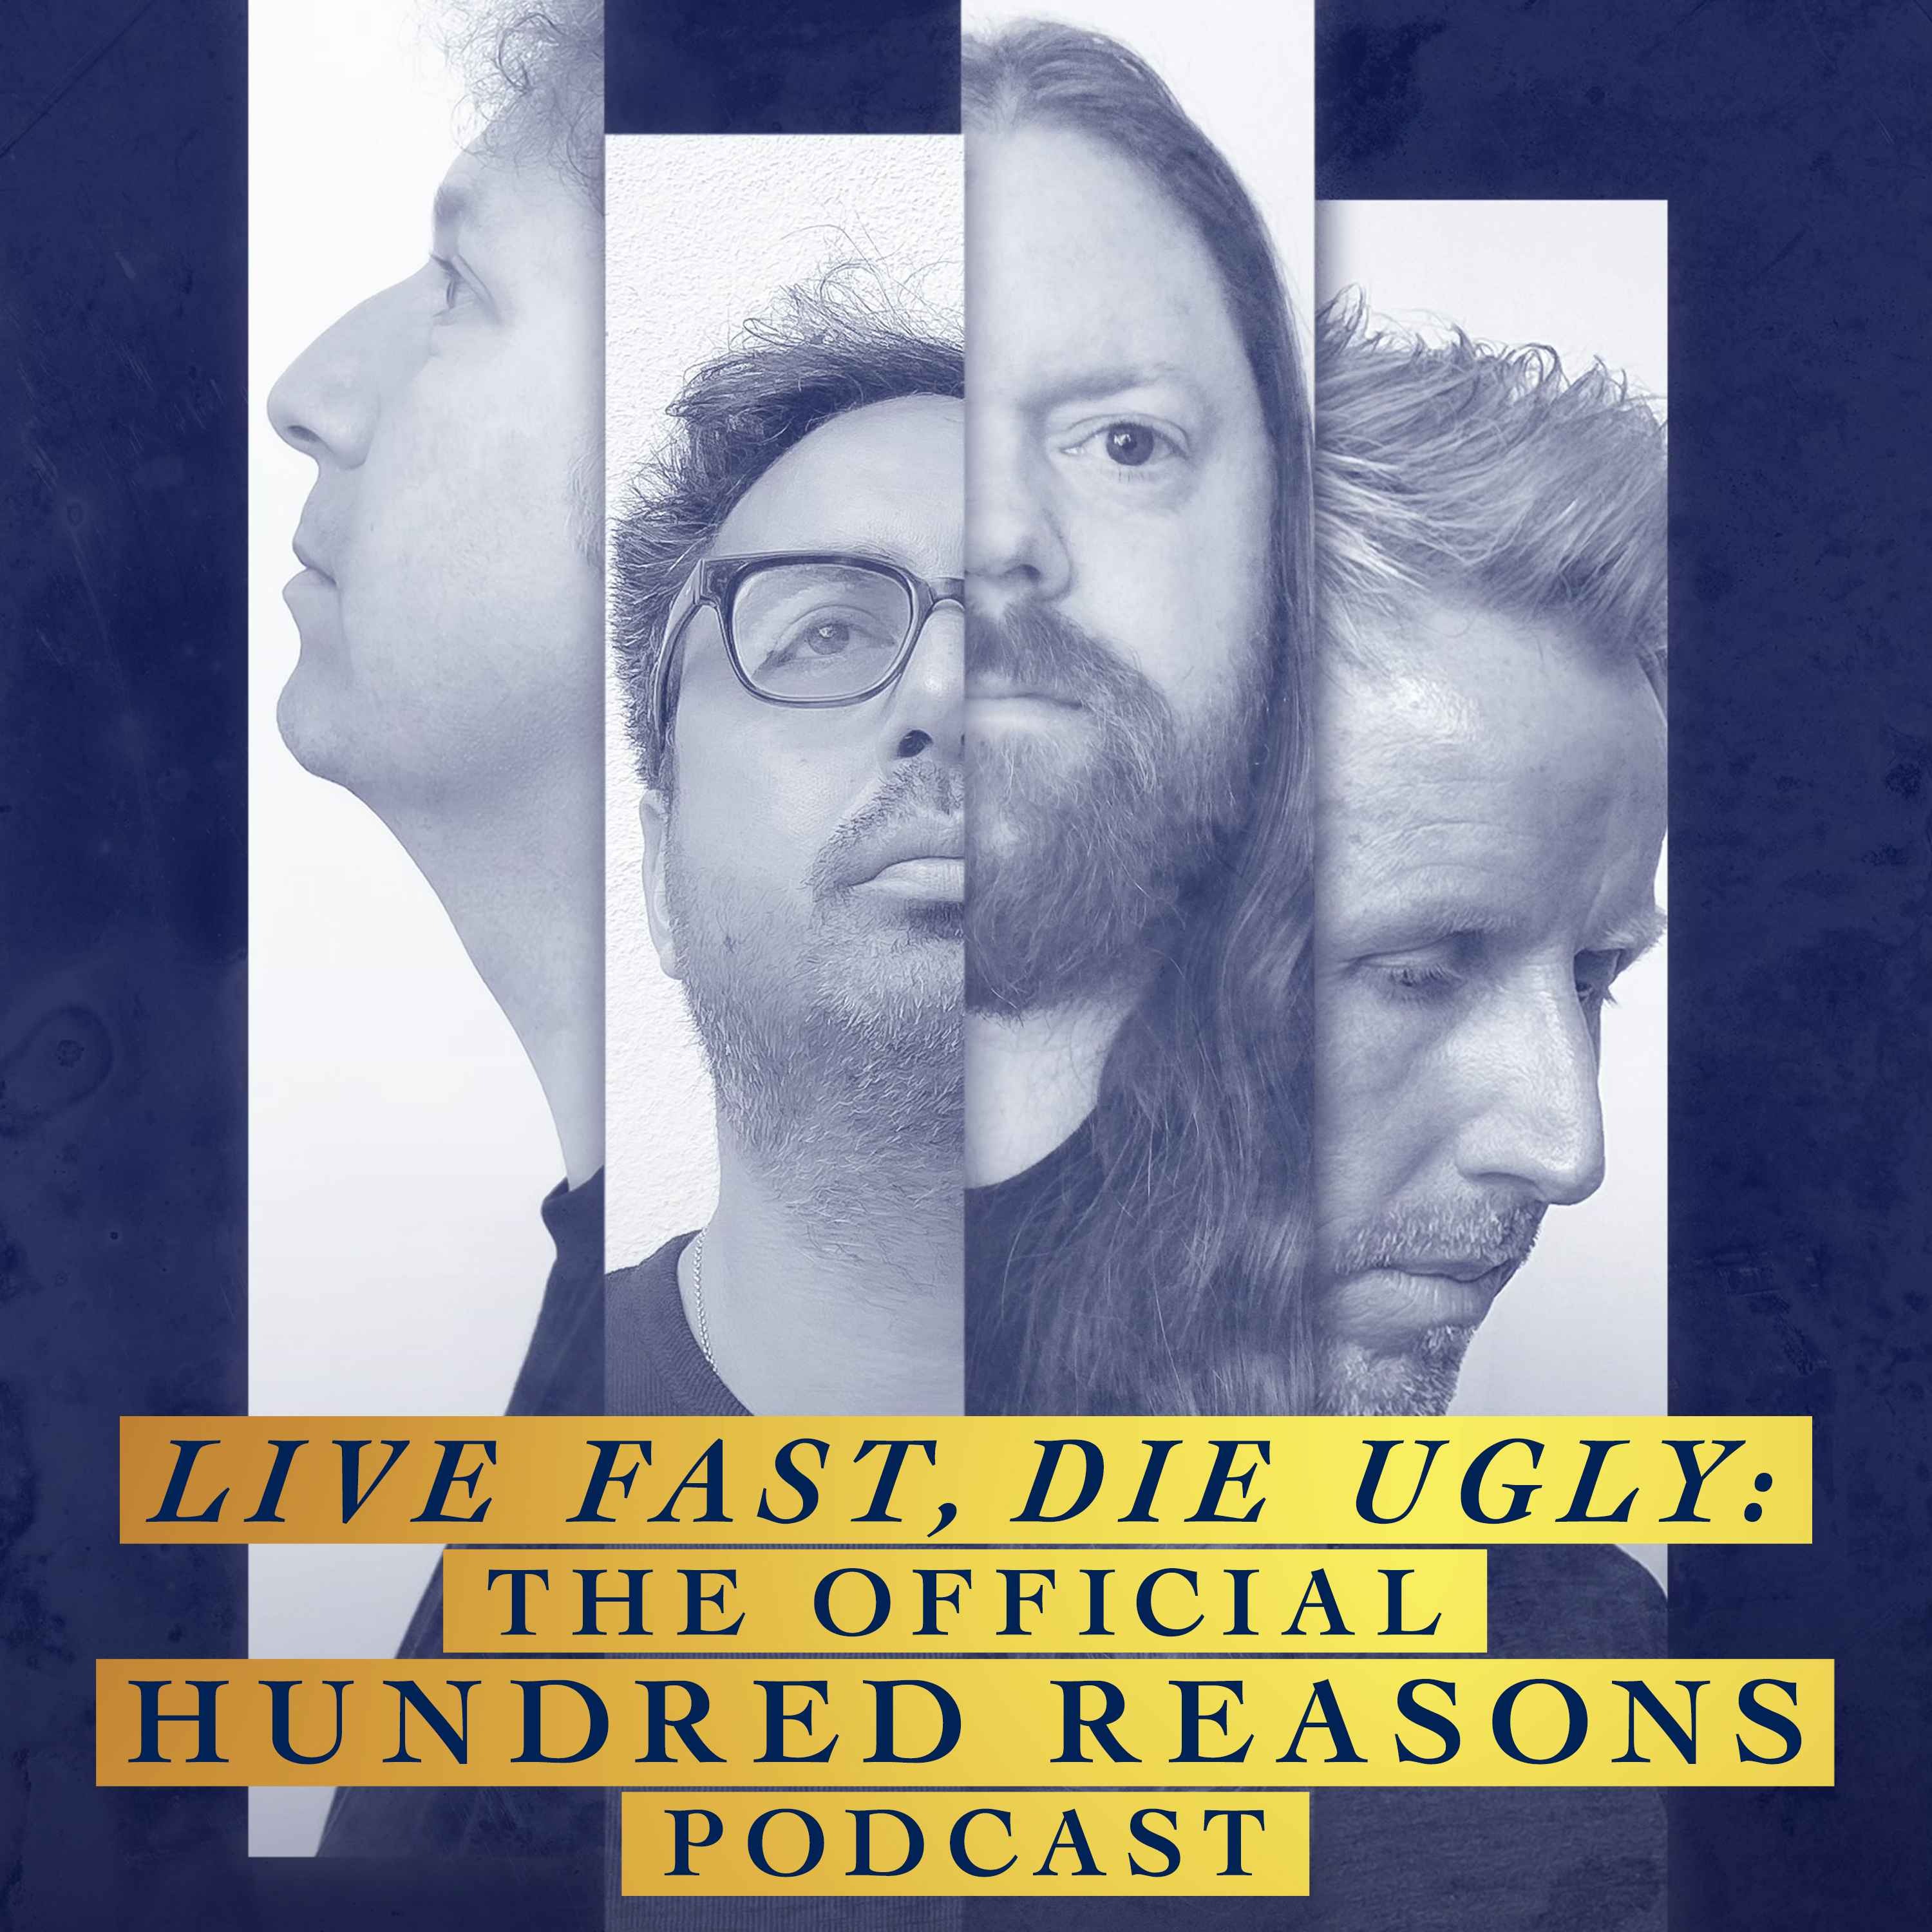 Live Fast, Die Ugly: The Hundred Reasons Podcast